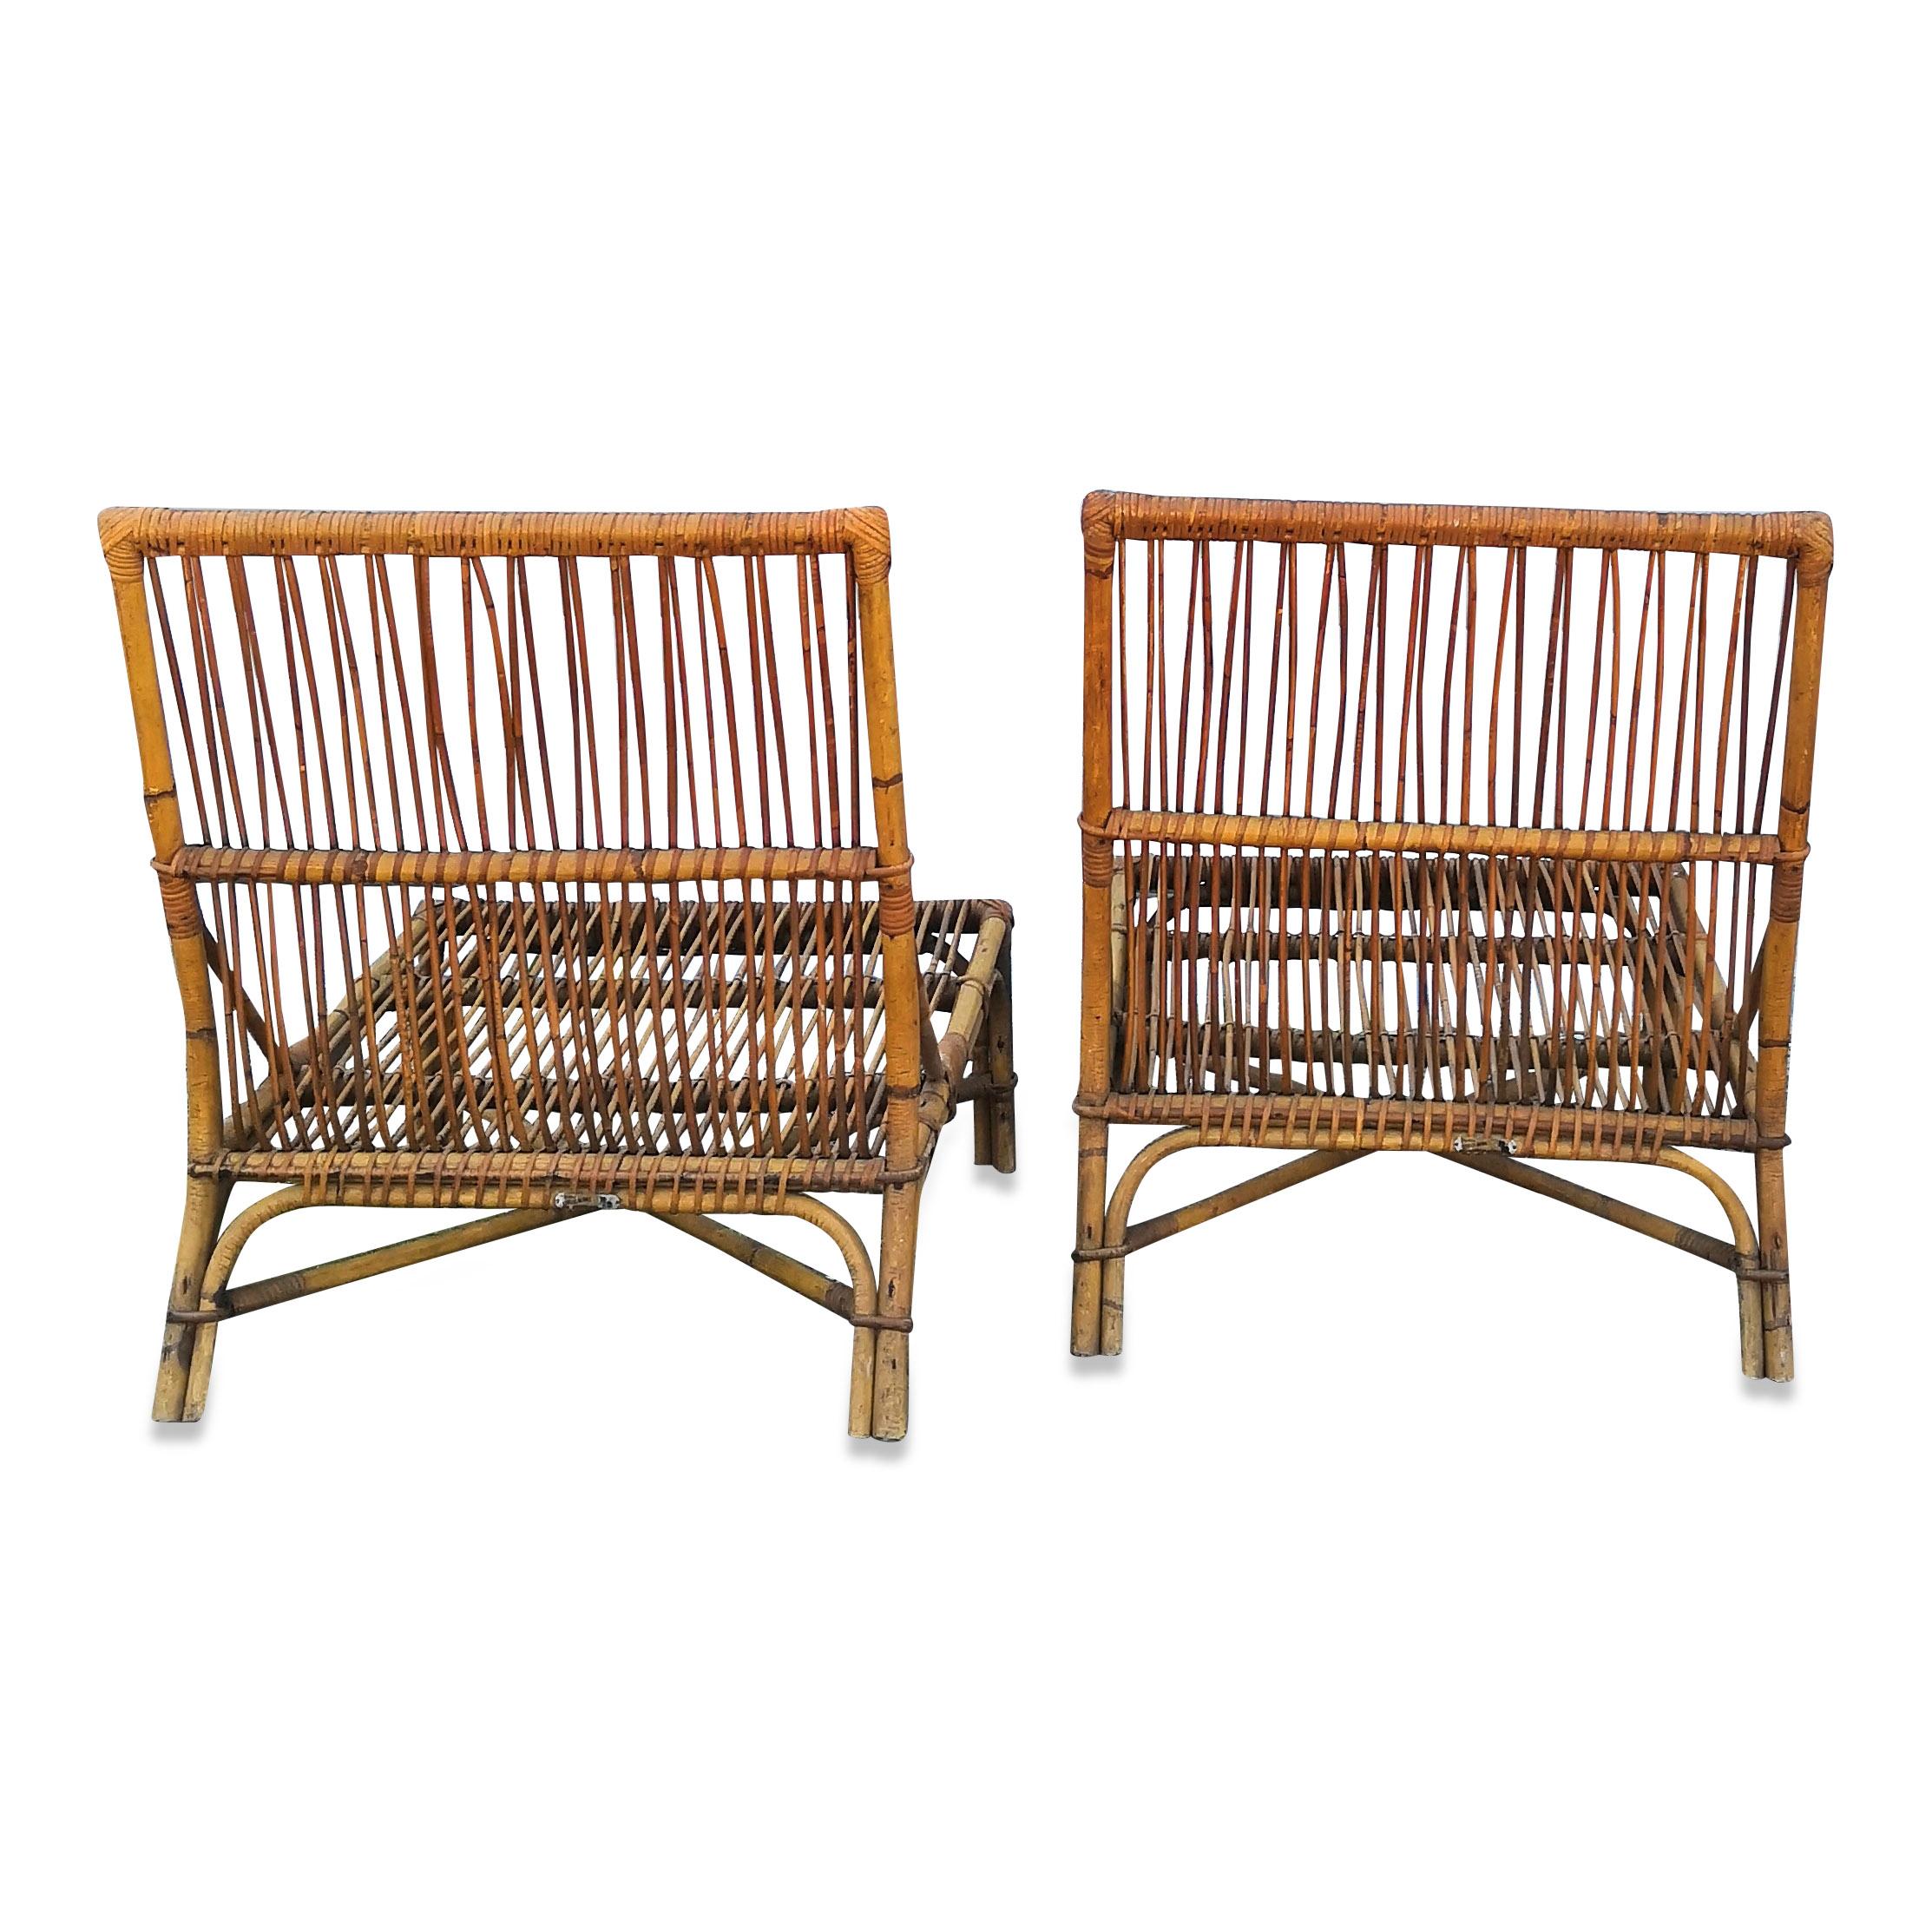 Mid-20th Century Rare Pair of Rattan Lounge Chairs by Audoux Minnet, France, 1950s